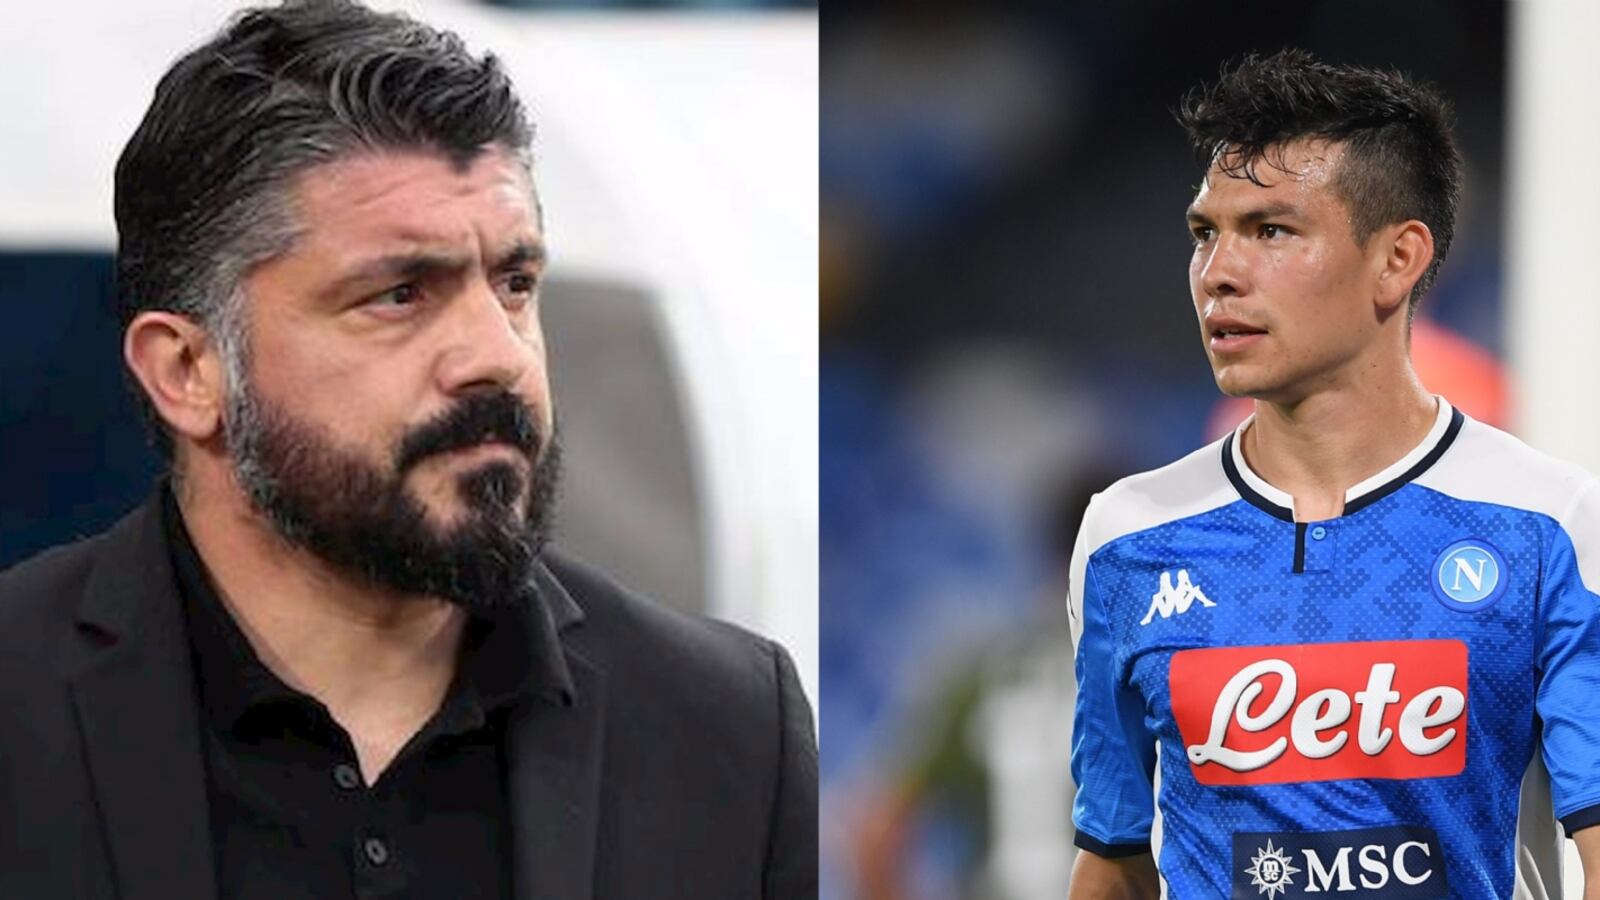 Love is back? Check out the reasons why Gennaro Gattuso wants to apologize to Chucky Lozano